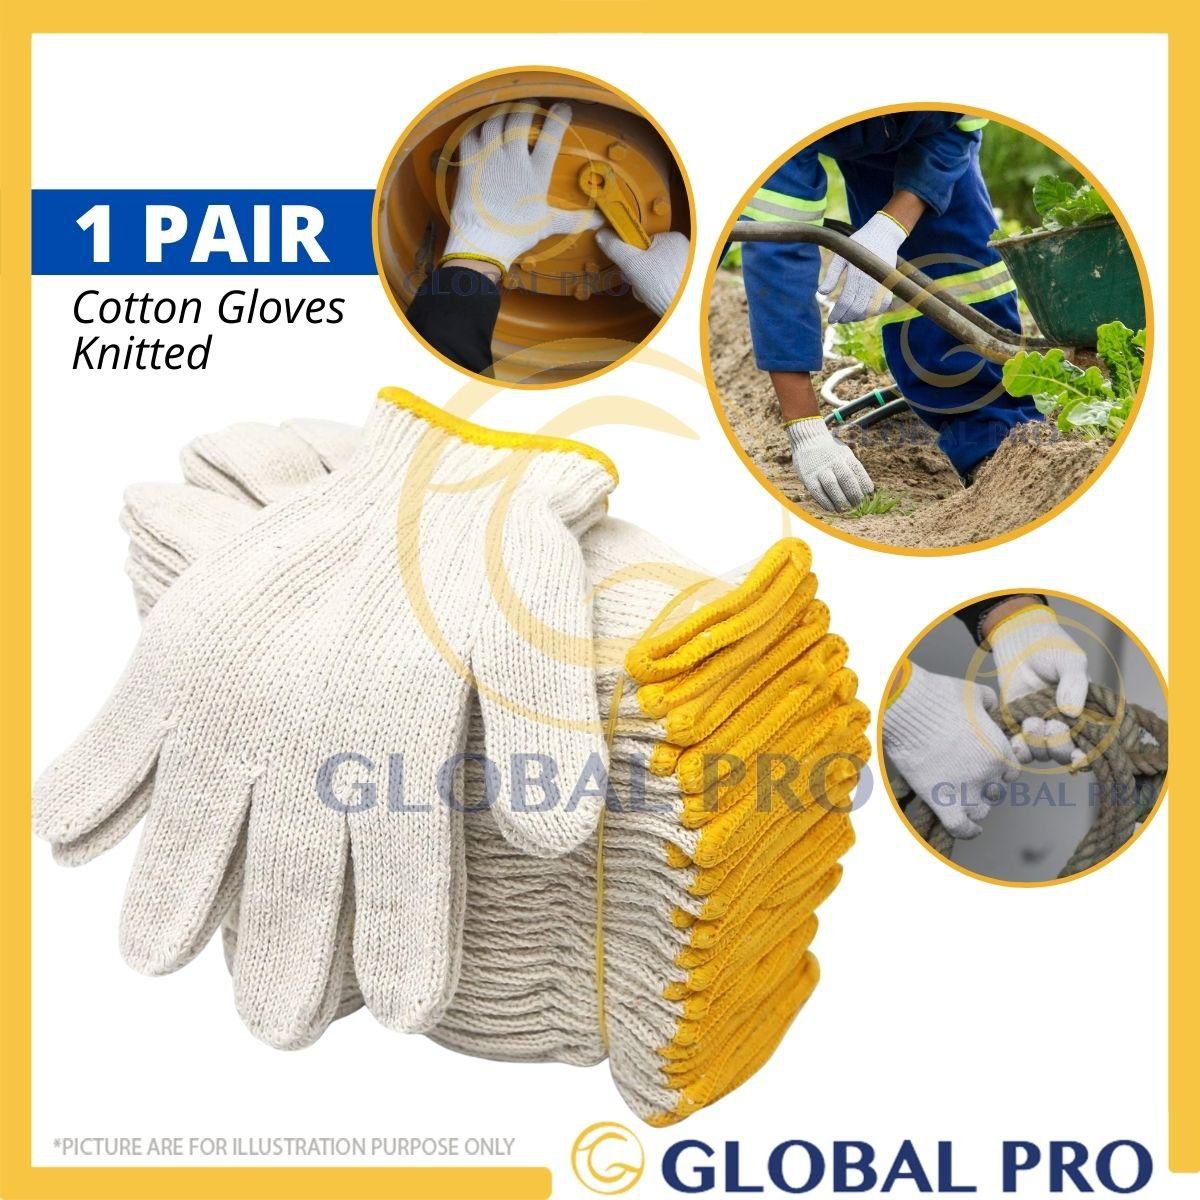 1 PAIR Cotton Knitted Gloves Non-slip Construction Protection Thick Woodworking A105